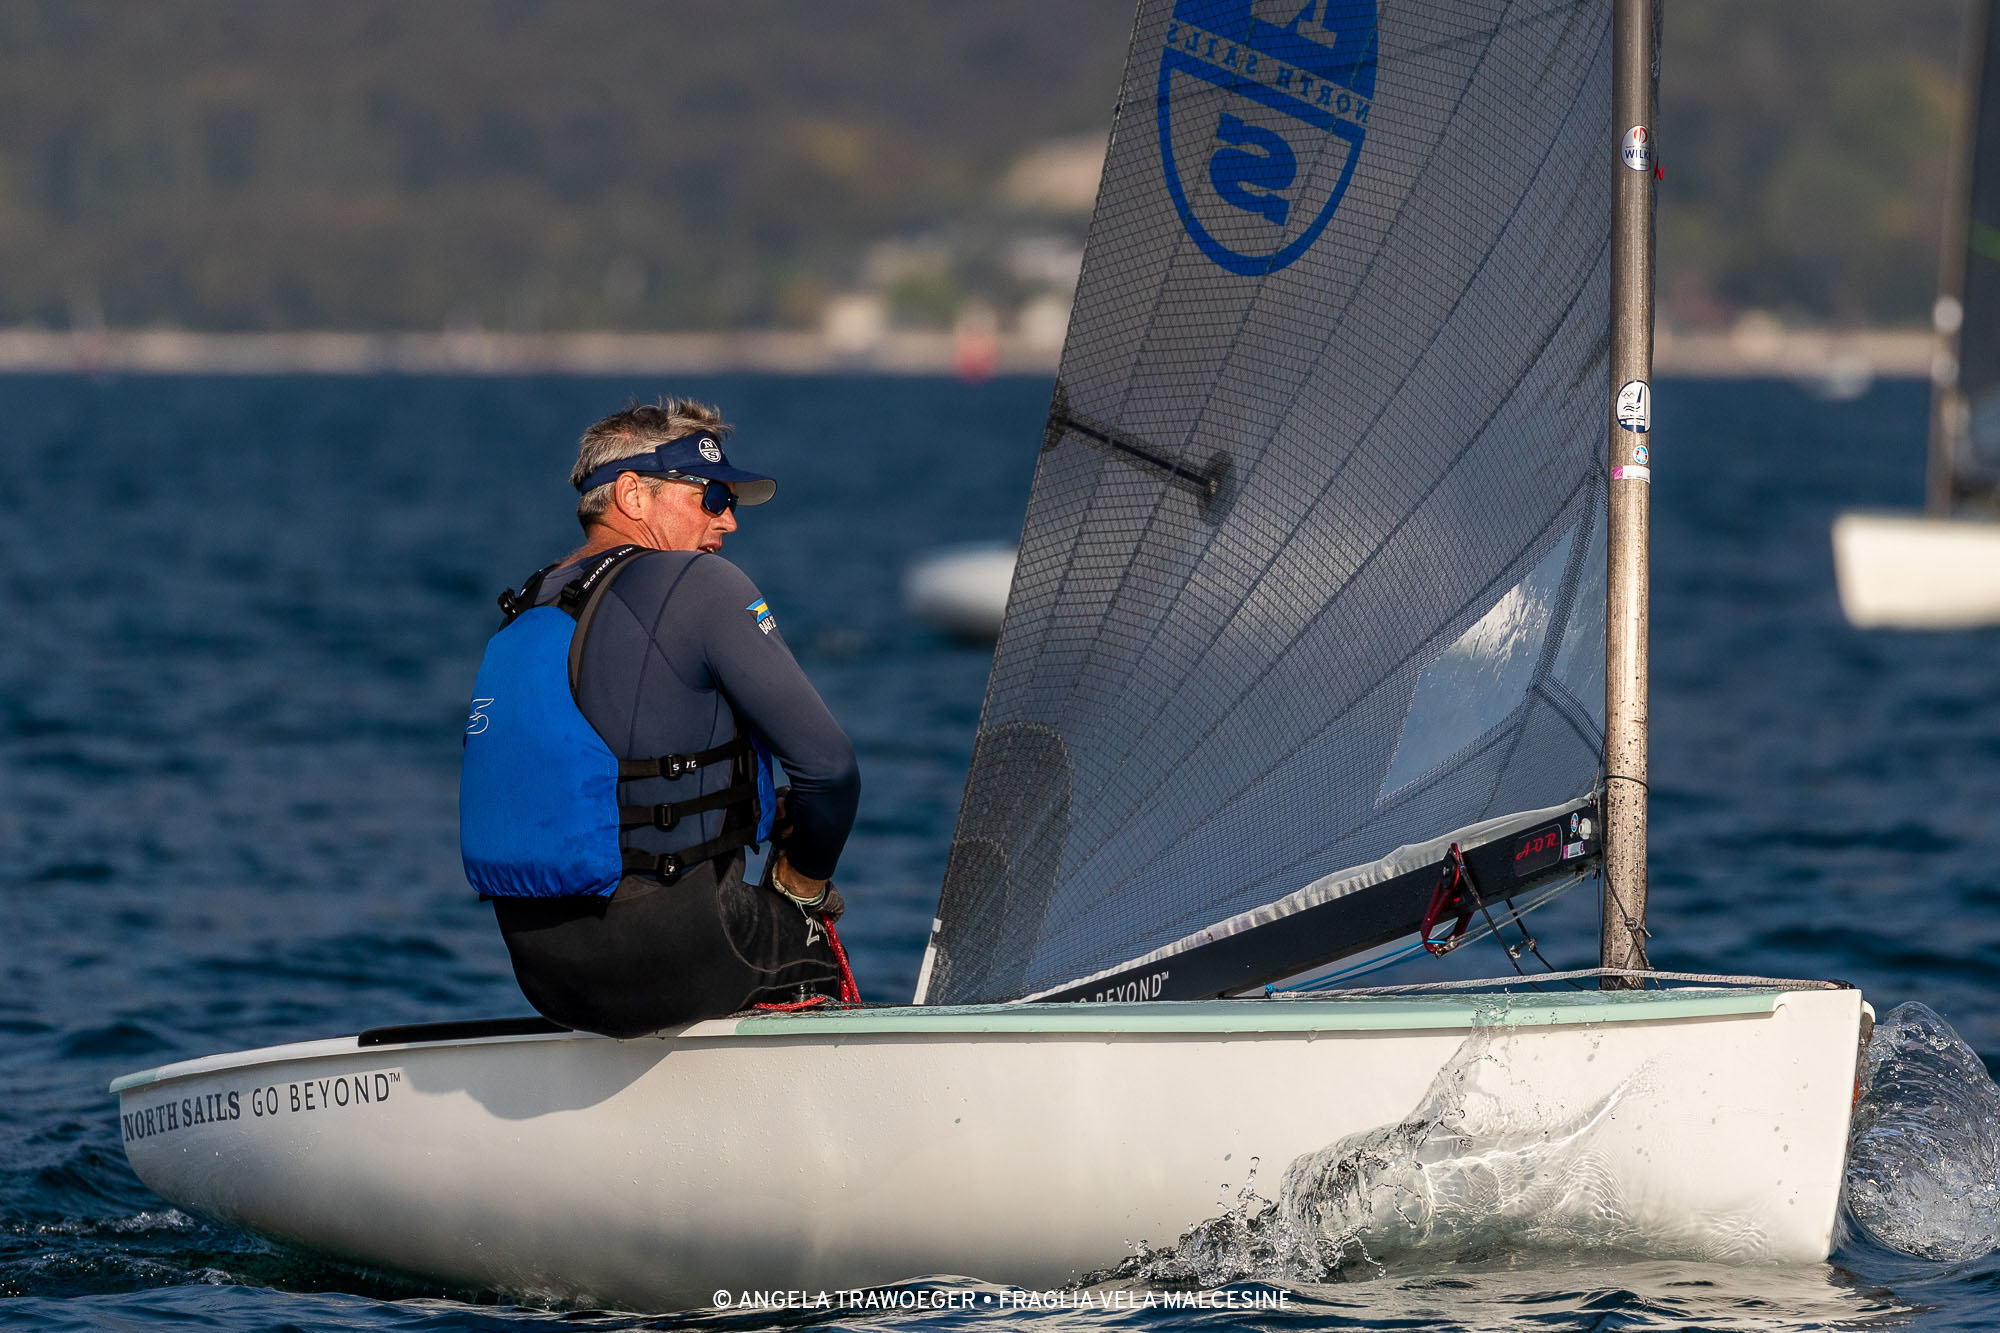  Finn  International Cup  Malcesine ITA  Final results  Victory for Christoph Burger SUI